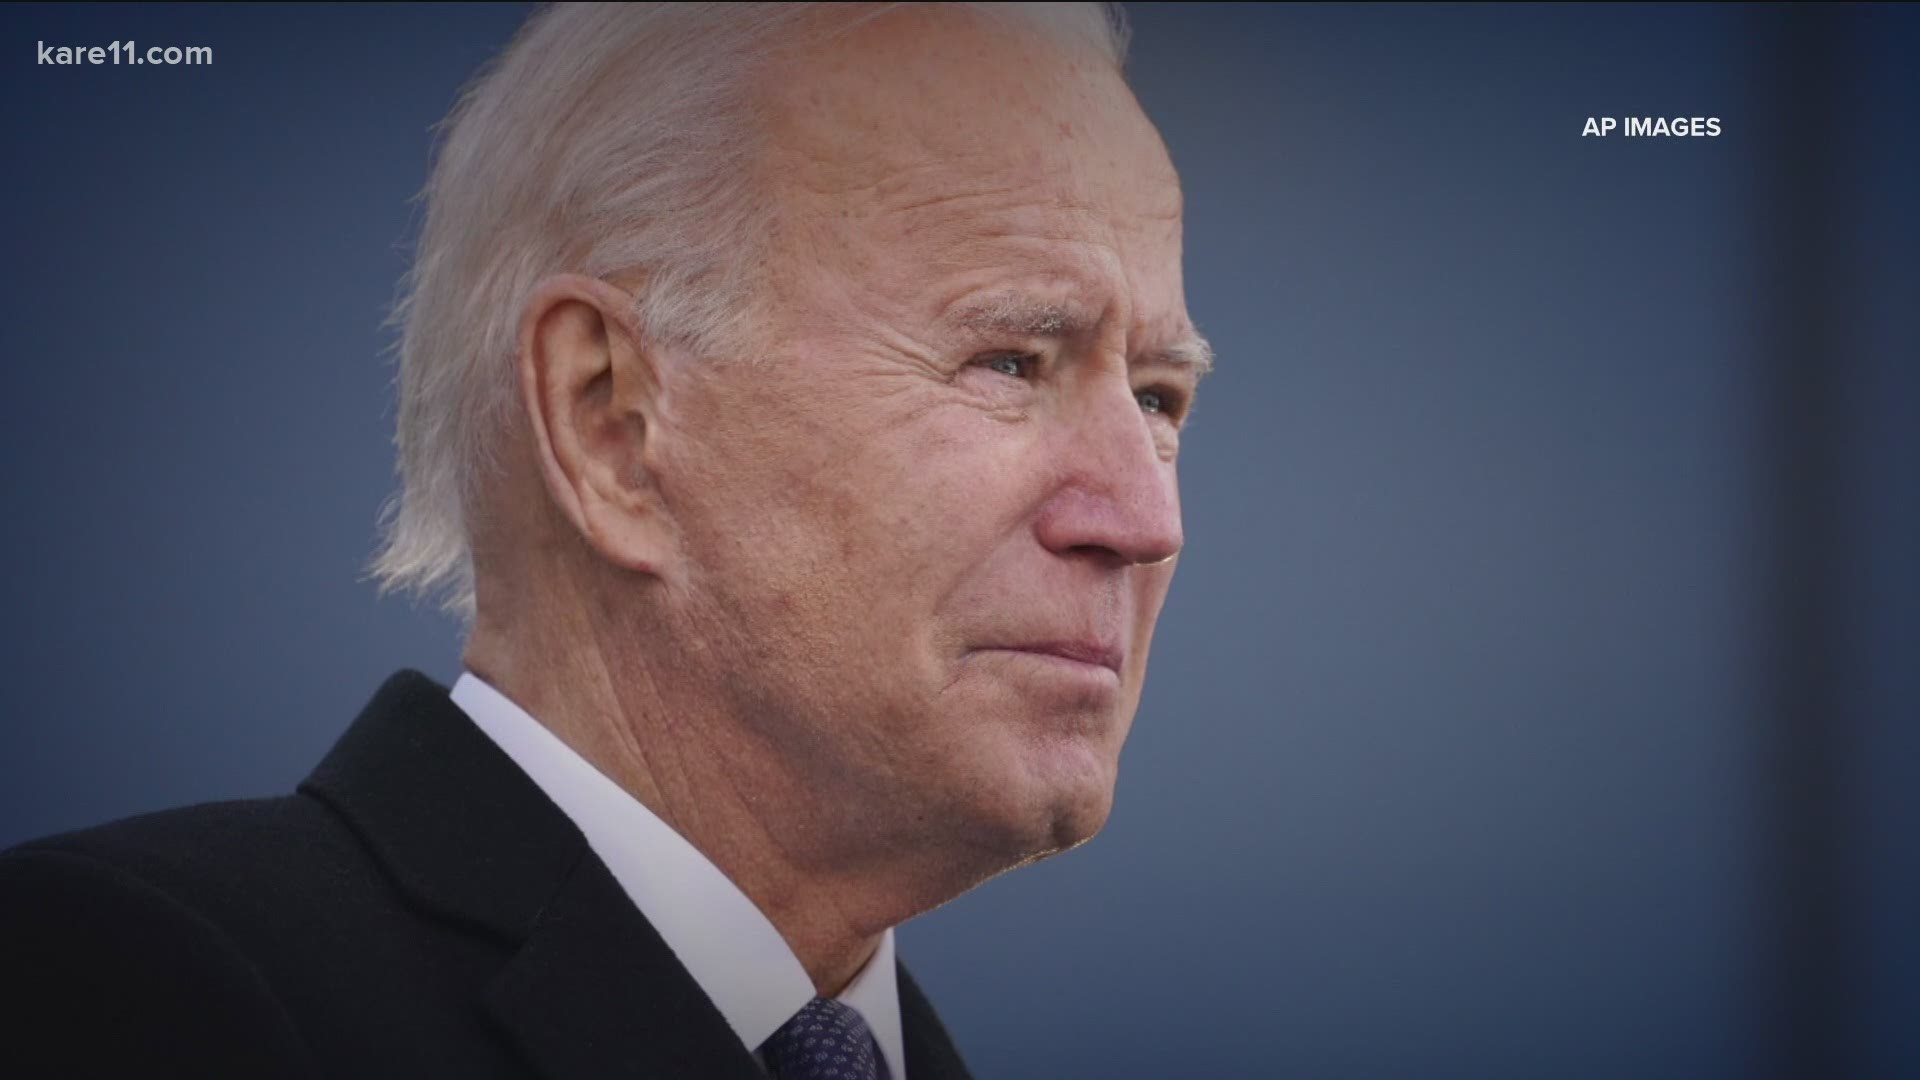 From the pandemic to violent political division, it's hard to find many historic parallels to explain what President Elect Joe Biden faces on Wednesday